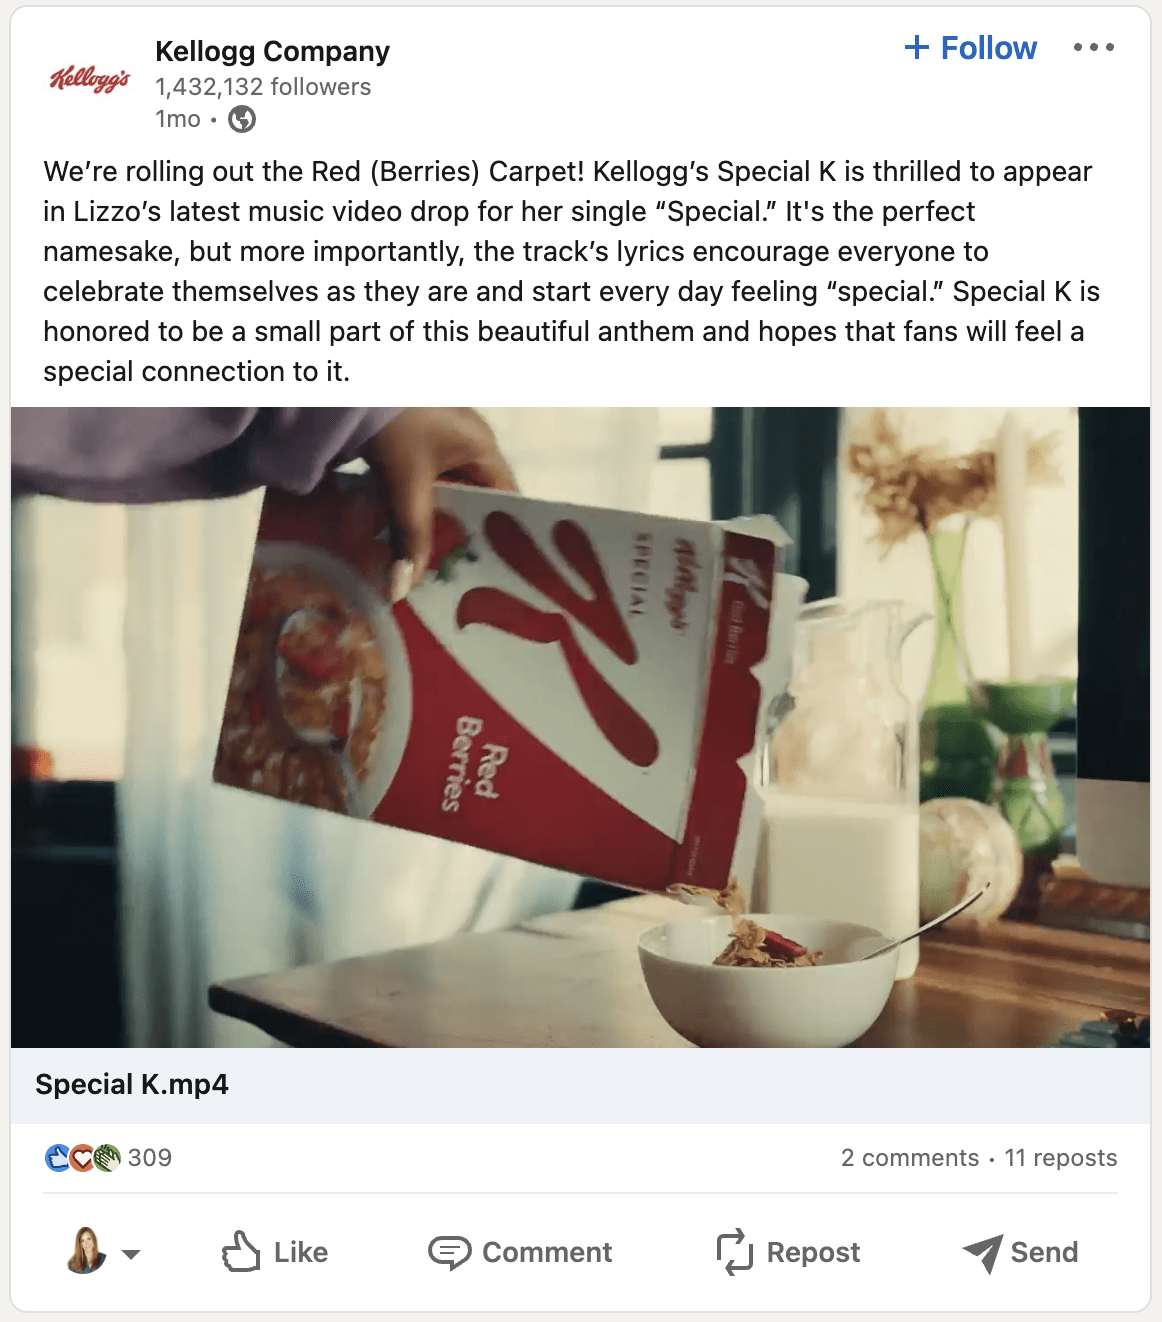 https://thebasispoint.com/wp-content/uploads/2023/03/Kellogg-LinkedIn-post-Special-K-cereal-makes-cameo-on-Lizzo-music-video-The-Basis-Point.png